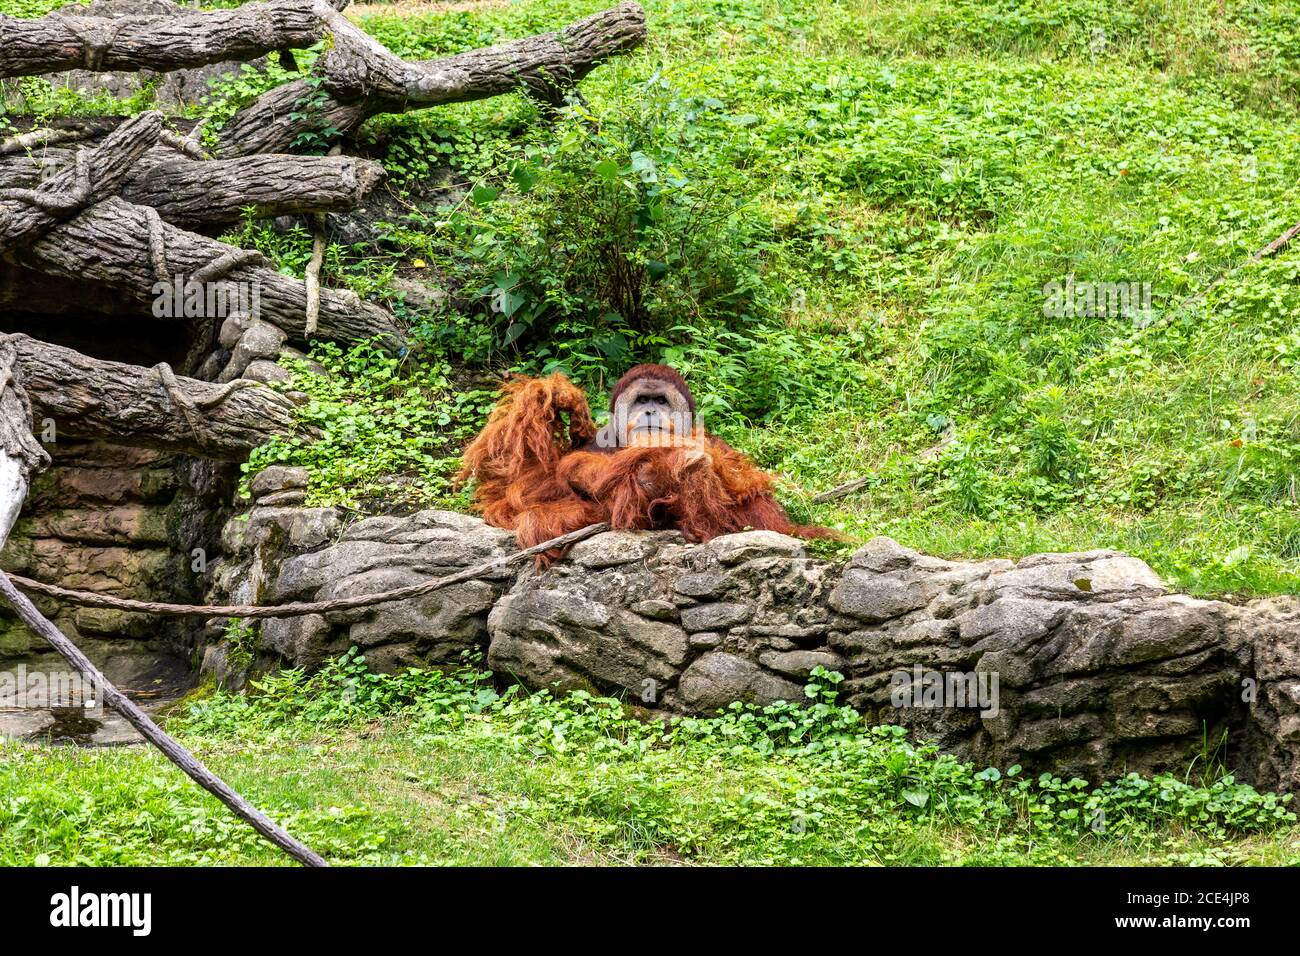 An orangutan poses for a picture at the Cincinnati Zoo. Stock Photo